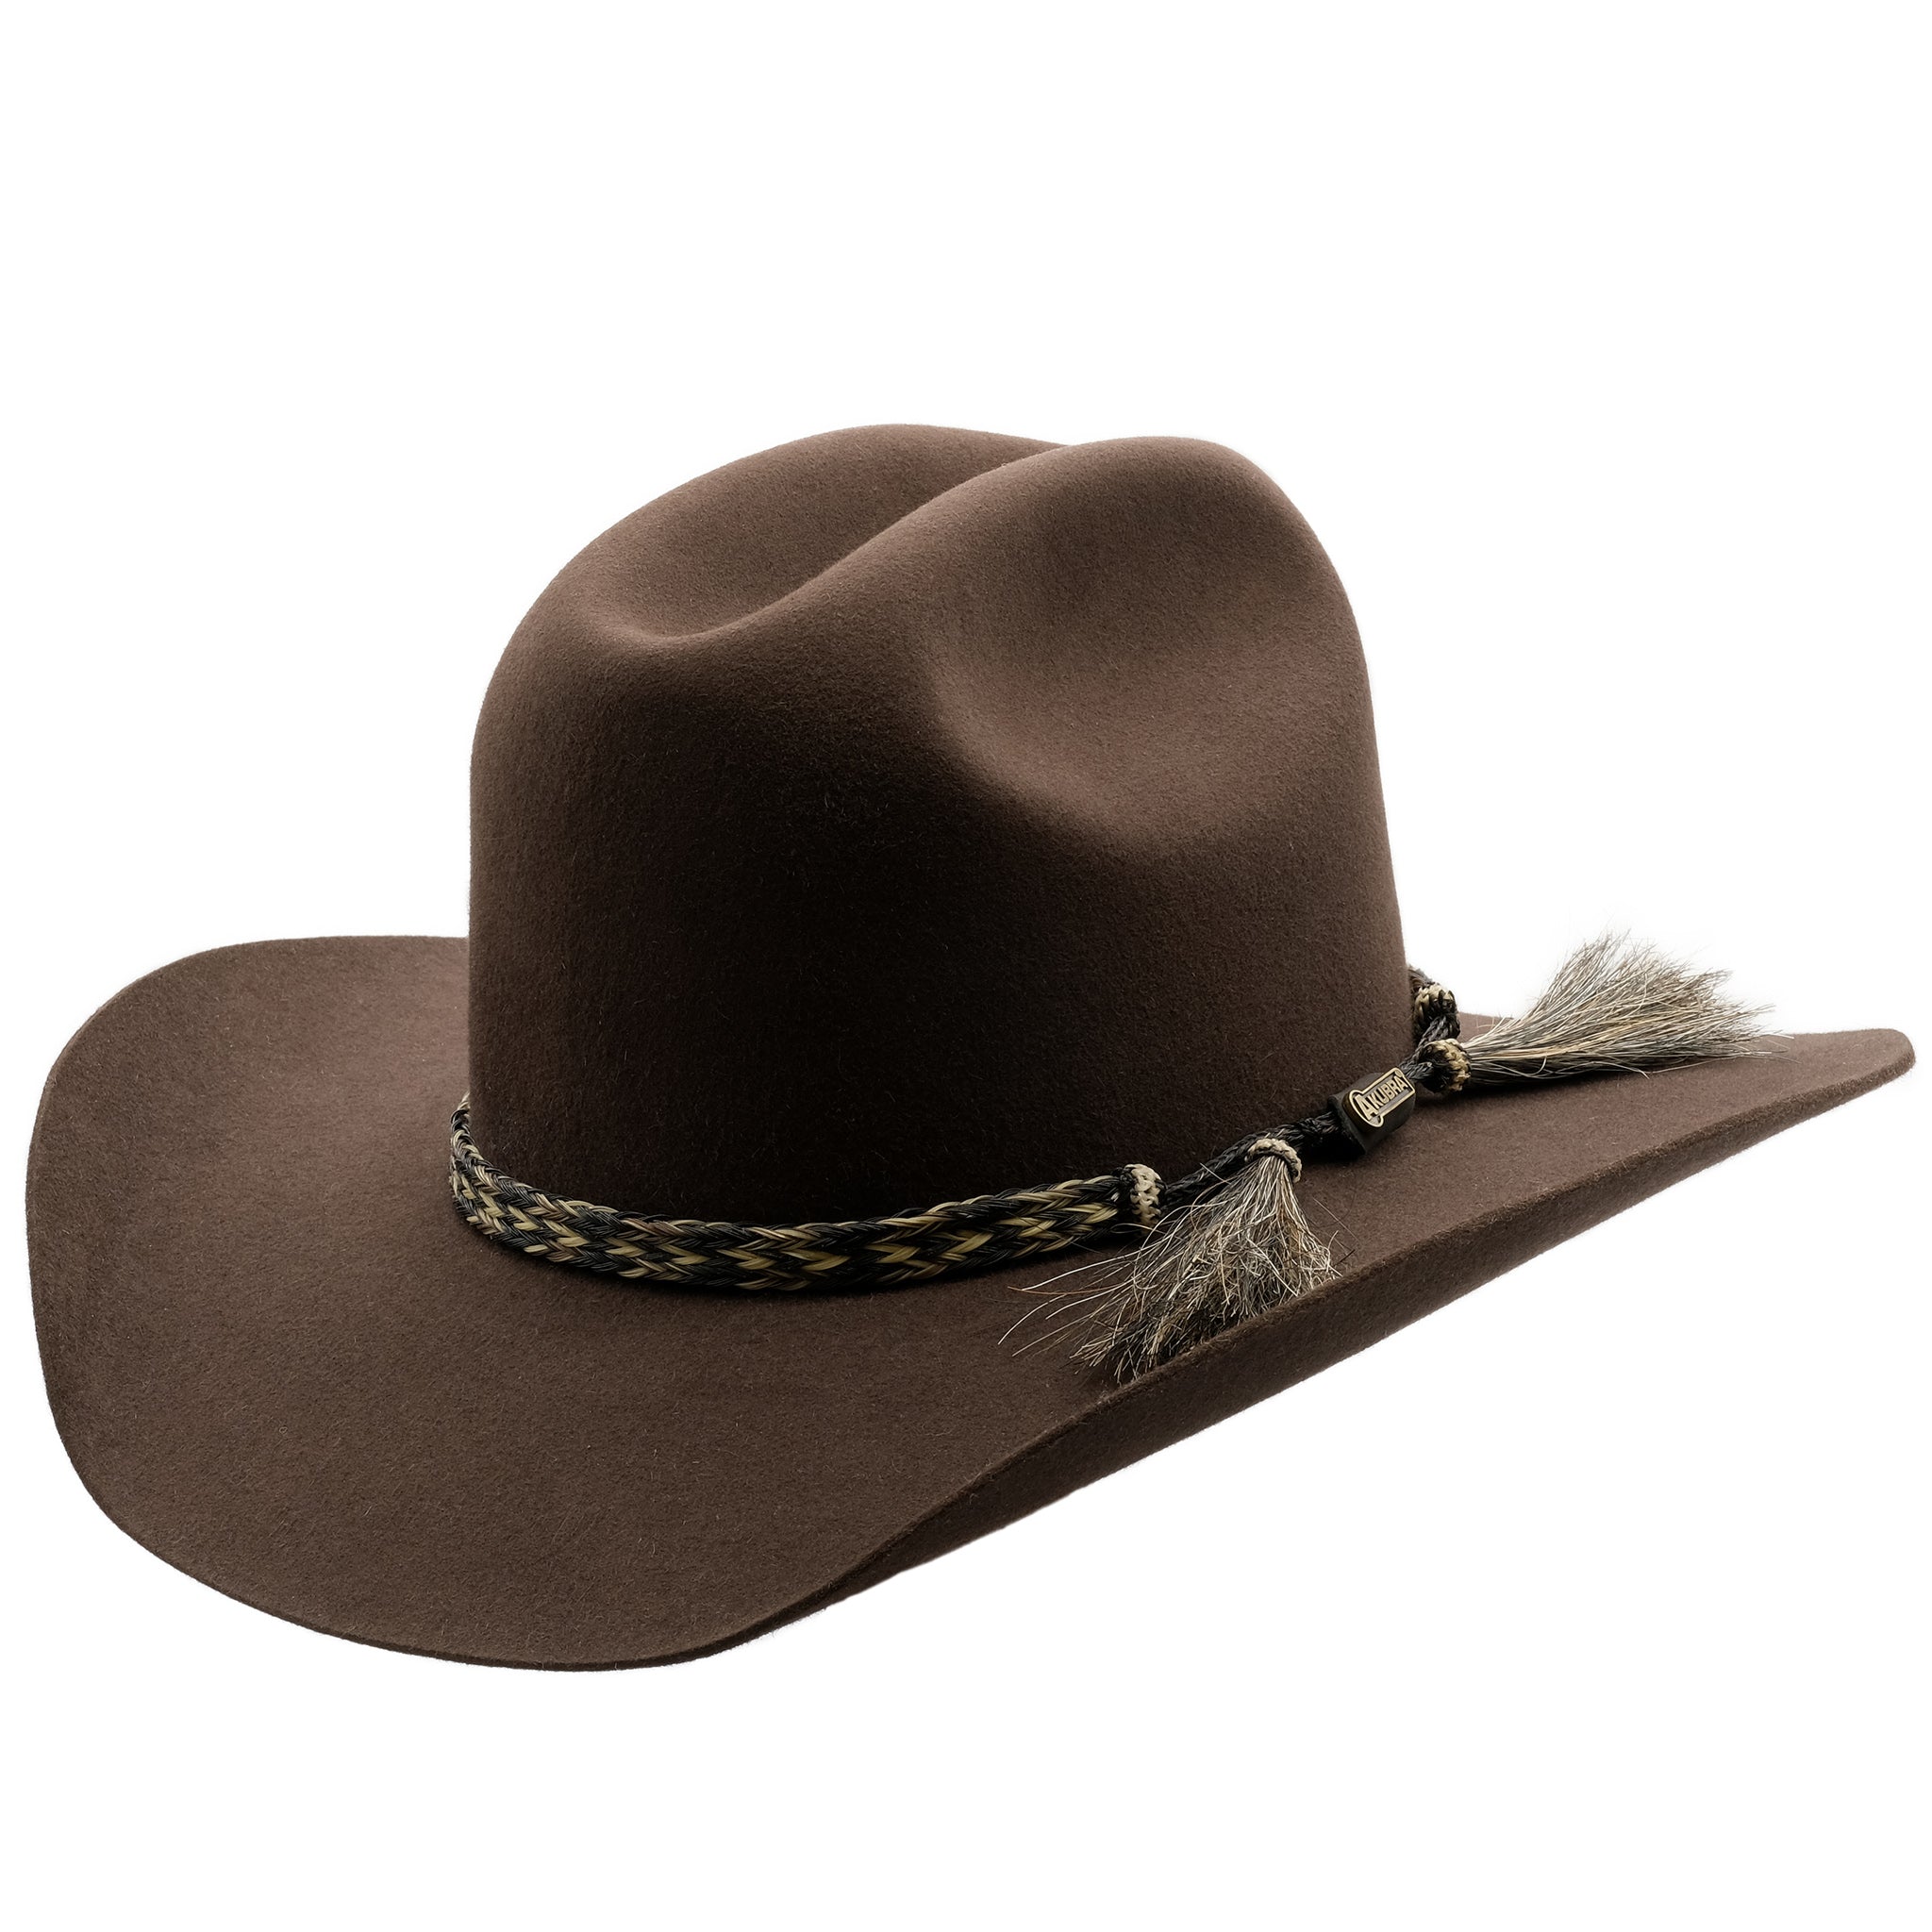 Angle view of Akubra Rough Rider in Loden colour